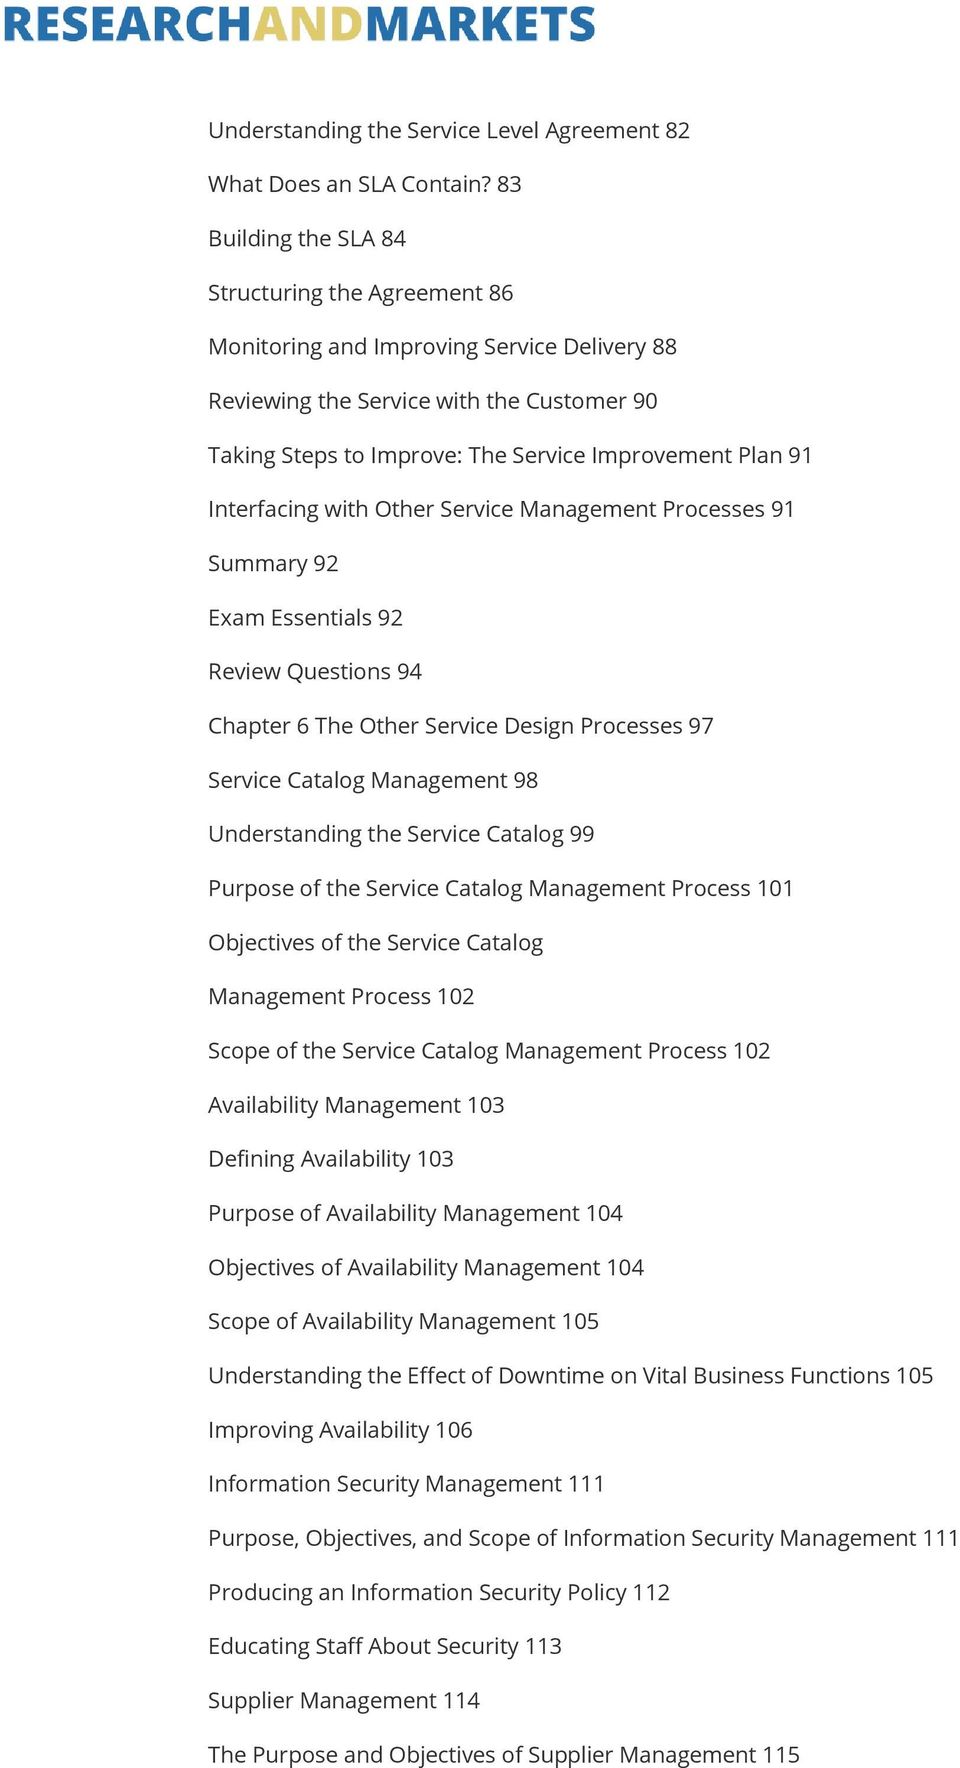 Interfacing with Other Service Management Processes 91 Summary 92 Exam Essentials 92 Review Questions 94 Chapter 6 The Other Service Design Processes 97 Service Catalog Management 98 Understanding